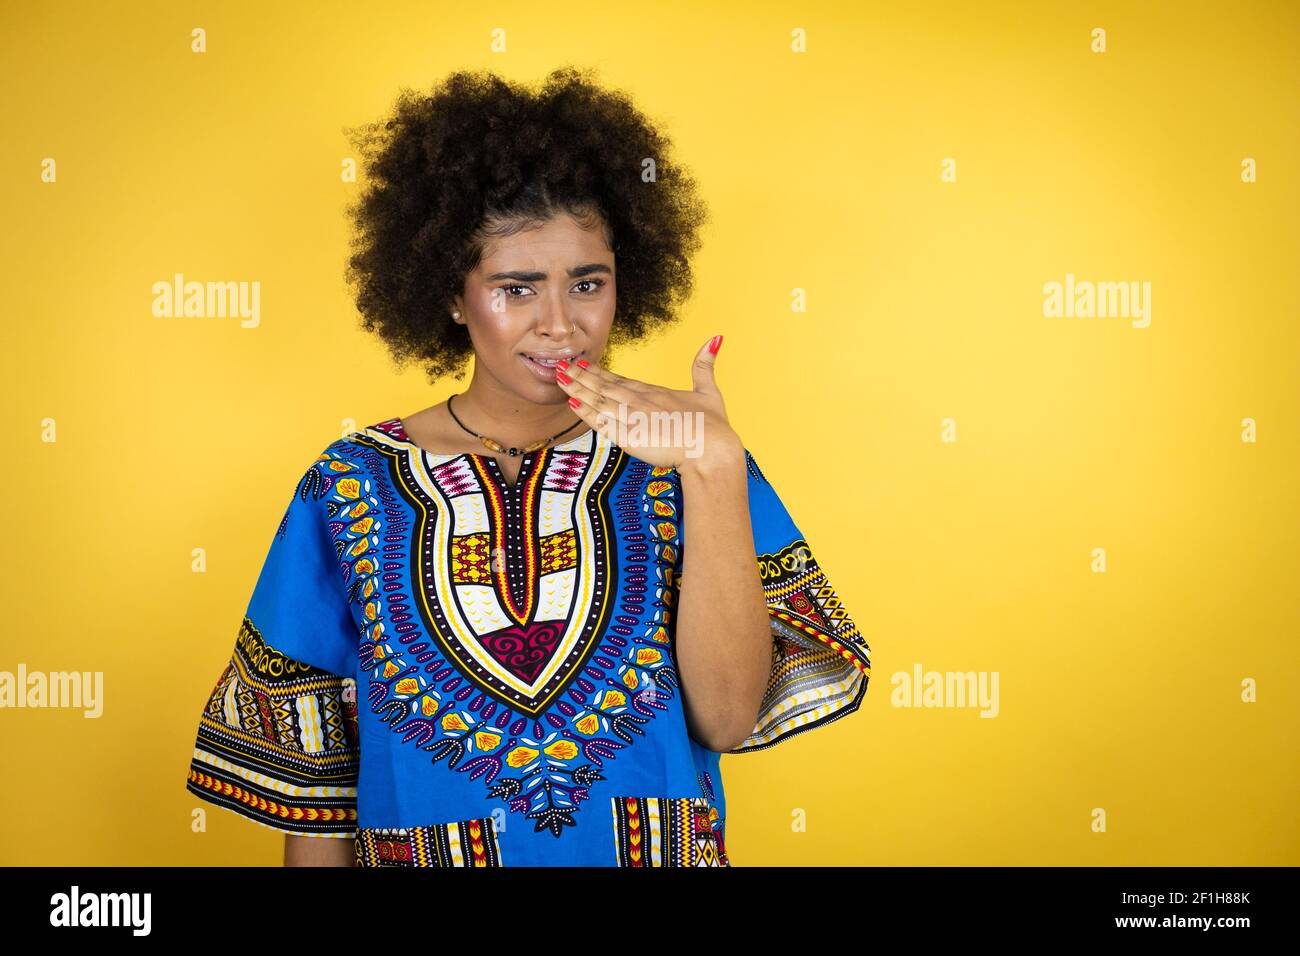 African American Woman Wearing African Clothing Over Yellow Background Disgusted With Her Hand 